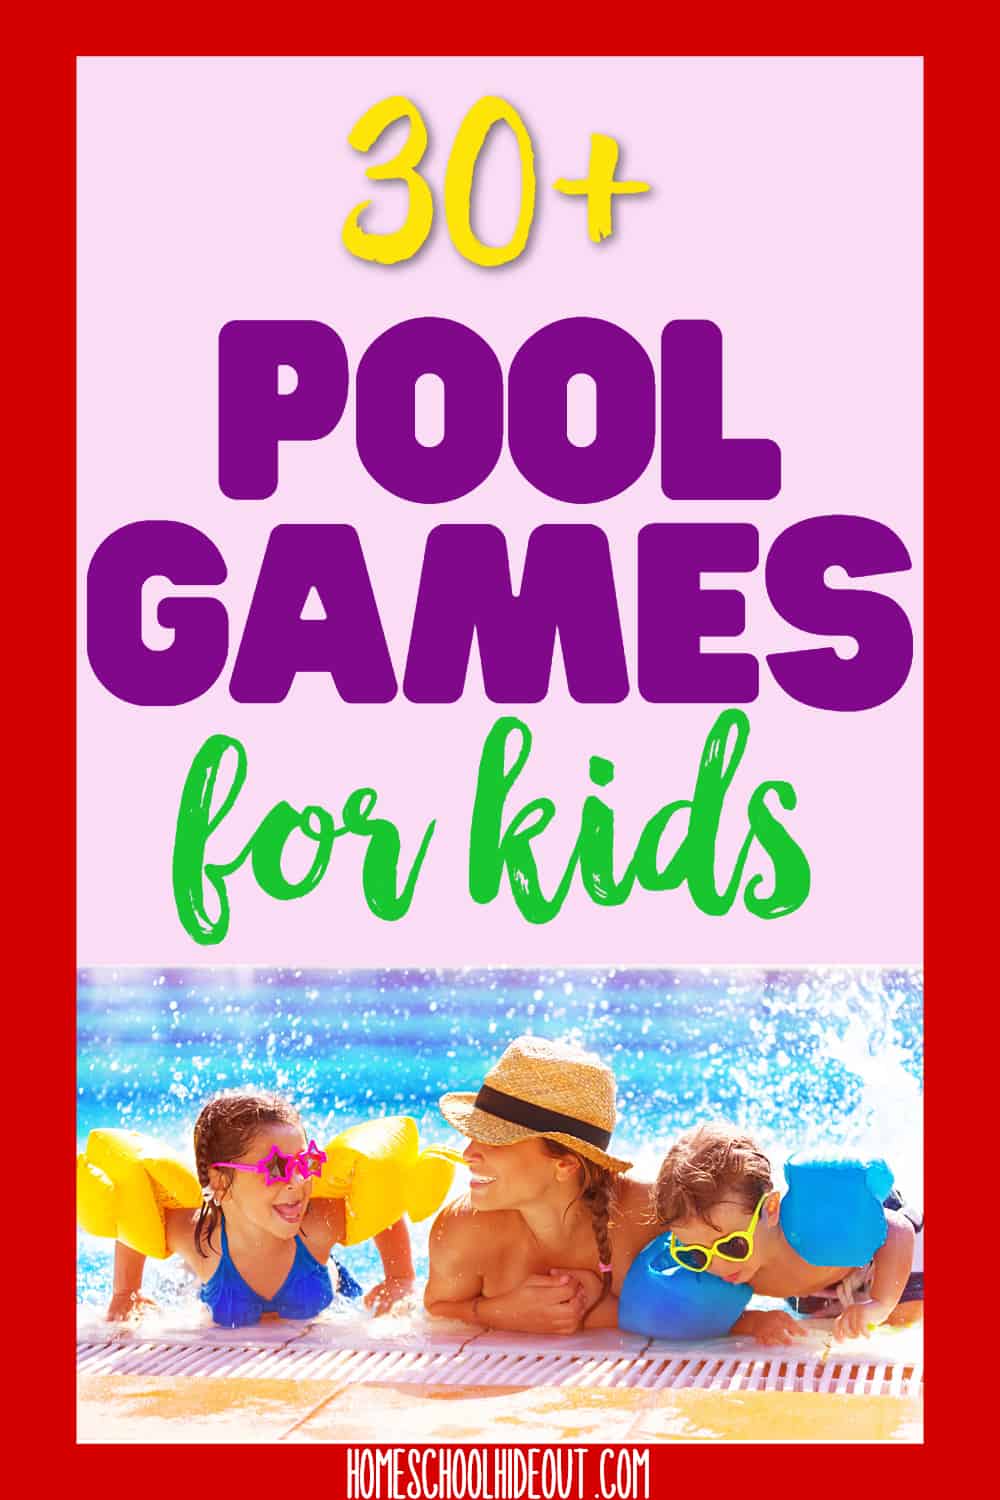 Sick of playing Marco Polo? These fun pool games for kids will make summer a BLAST! #summer #poolparty #swimming #games #funforkids